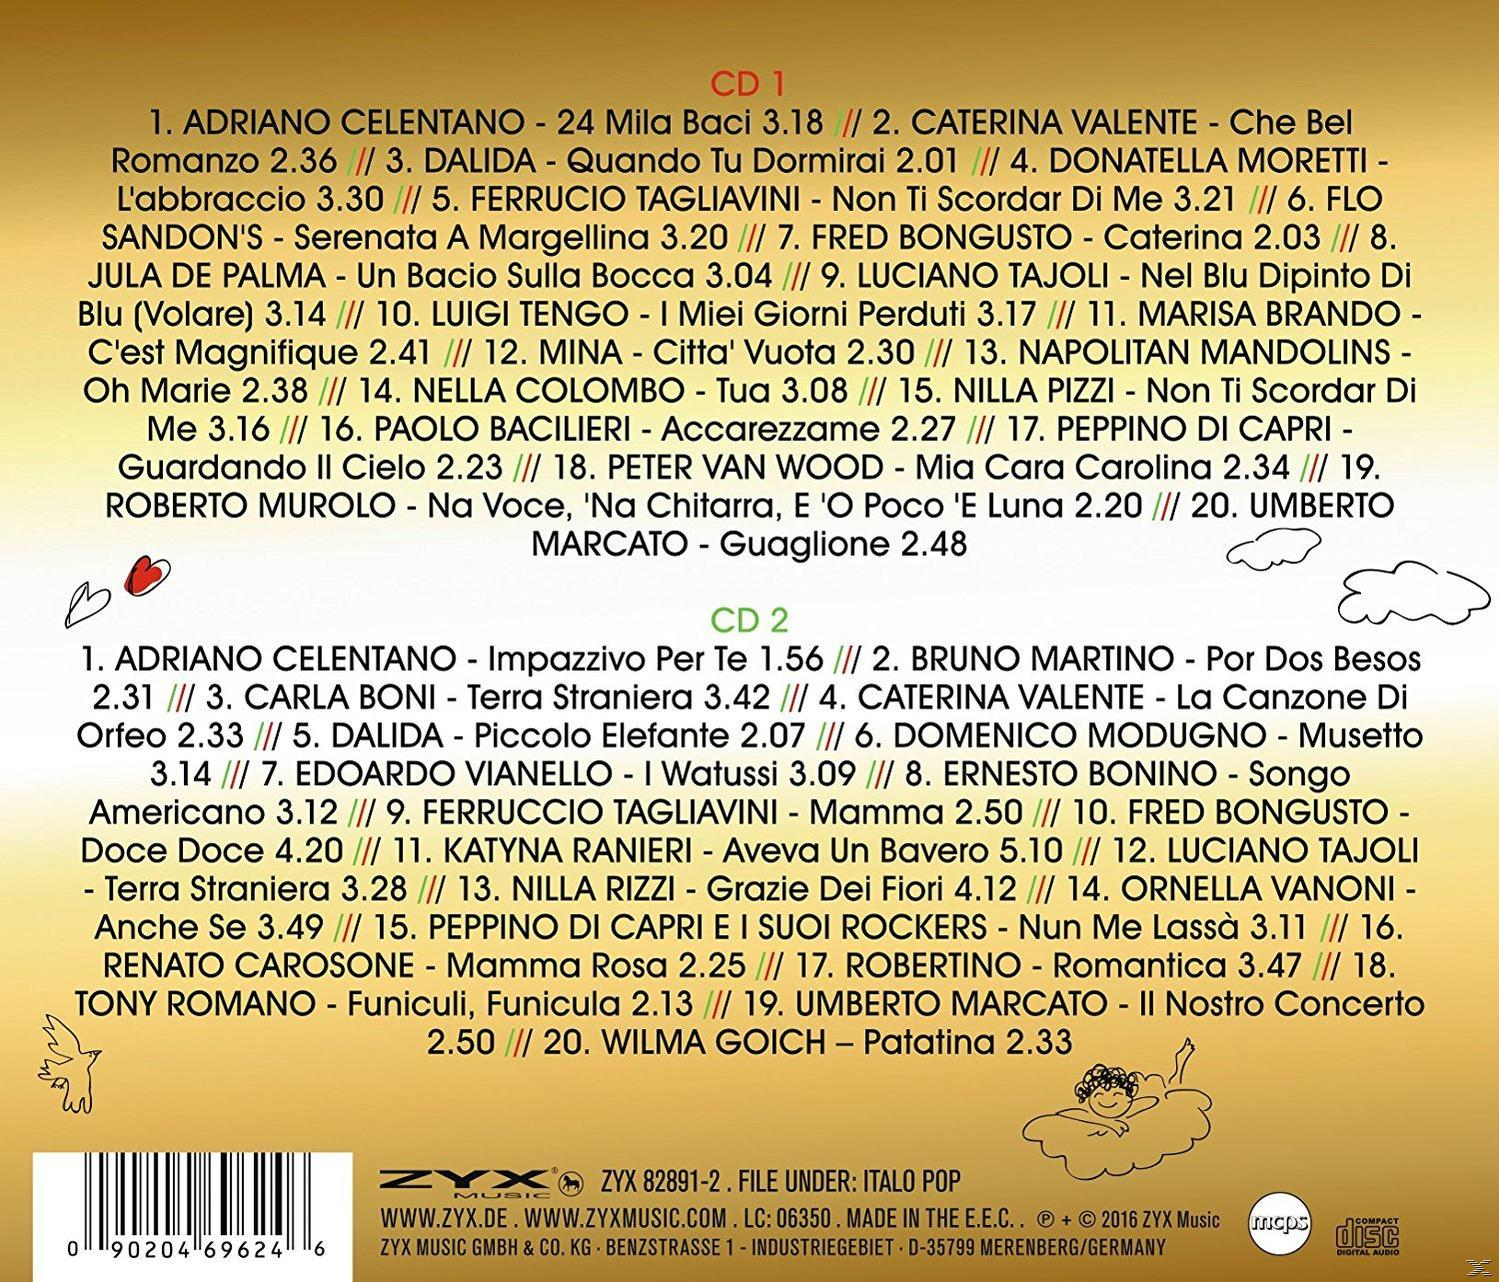 VARIOUS - Italian Canzone: Golden (CD) Hits 